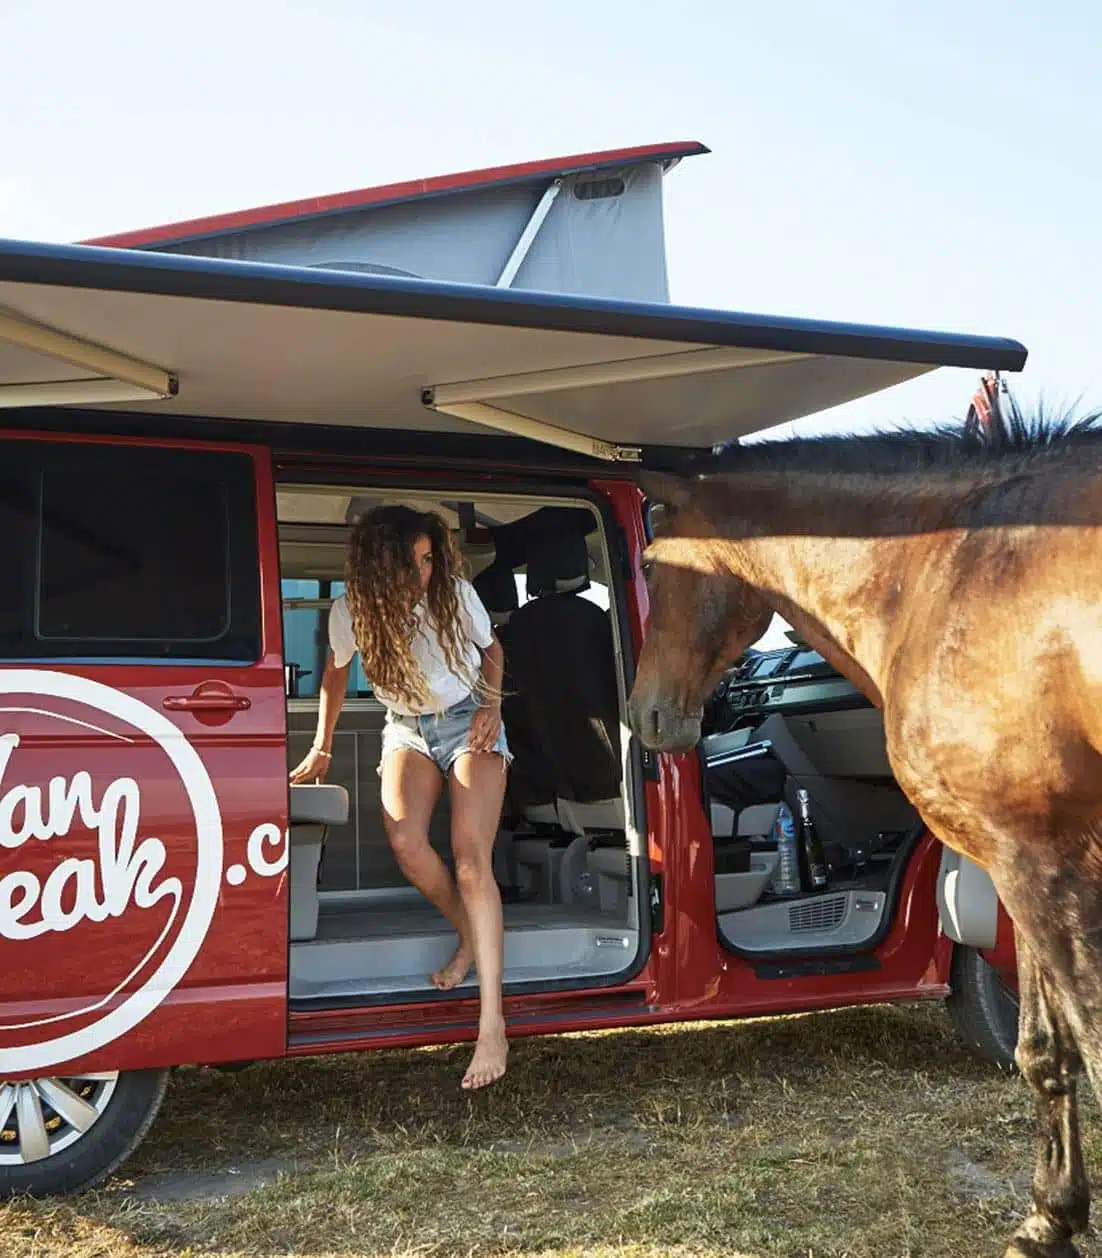 Woman stepping out of a red campervan in front of a horse